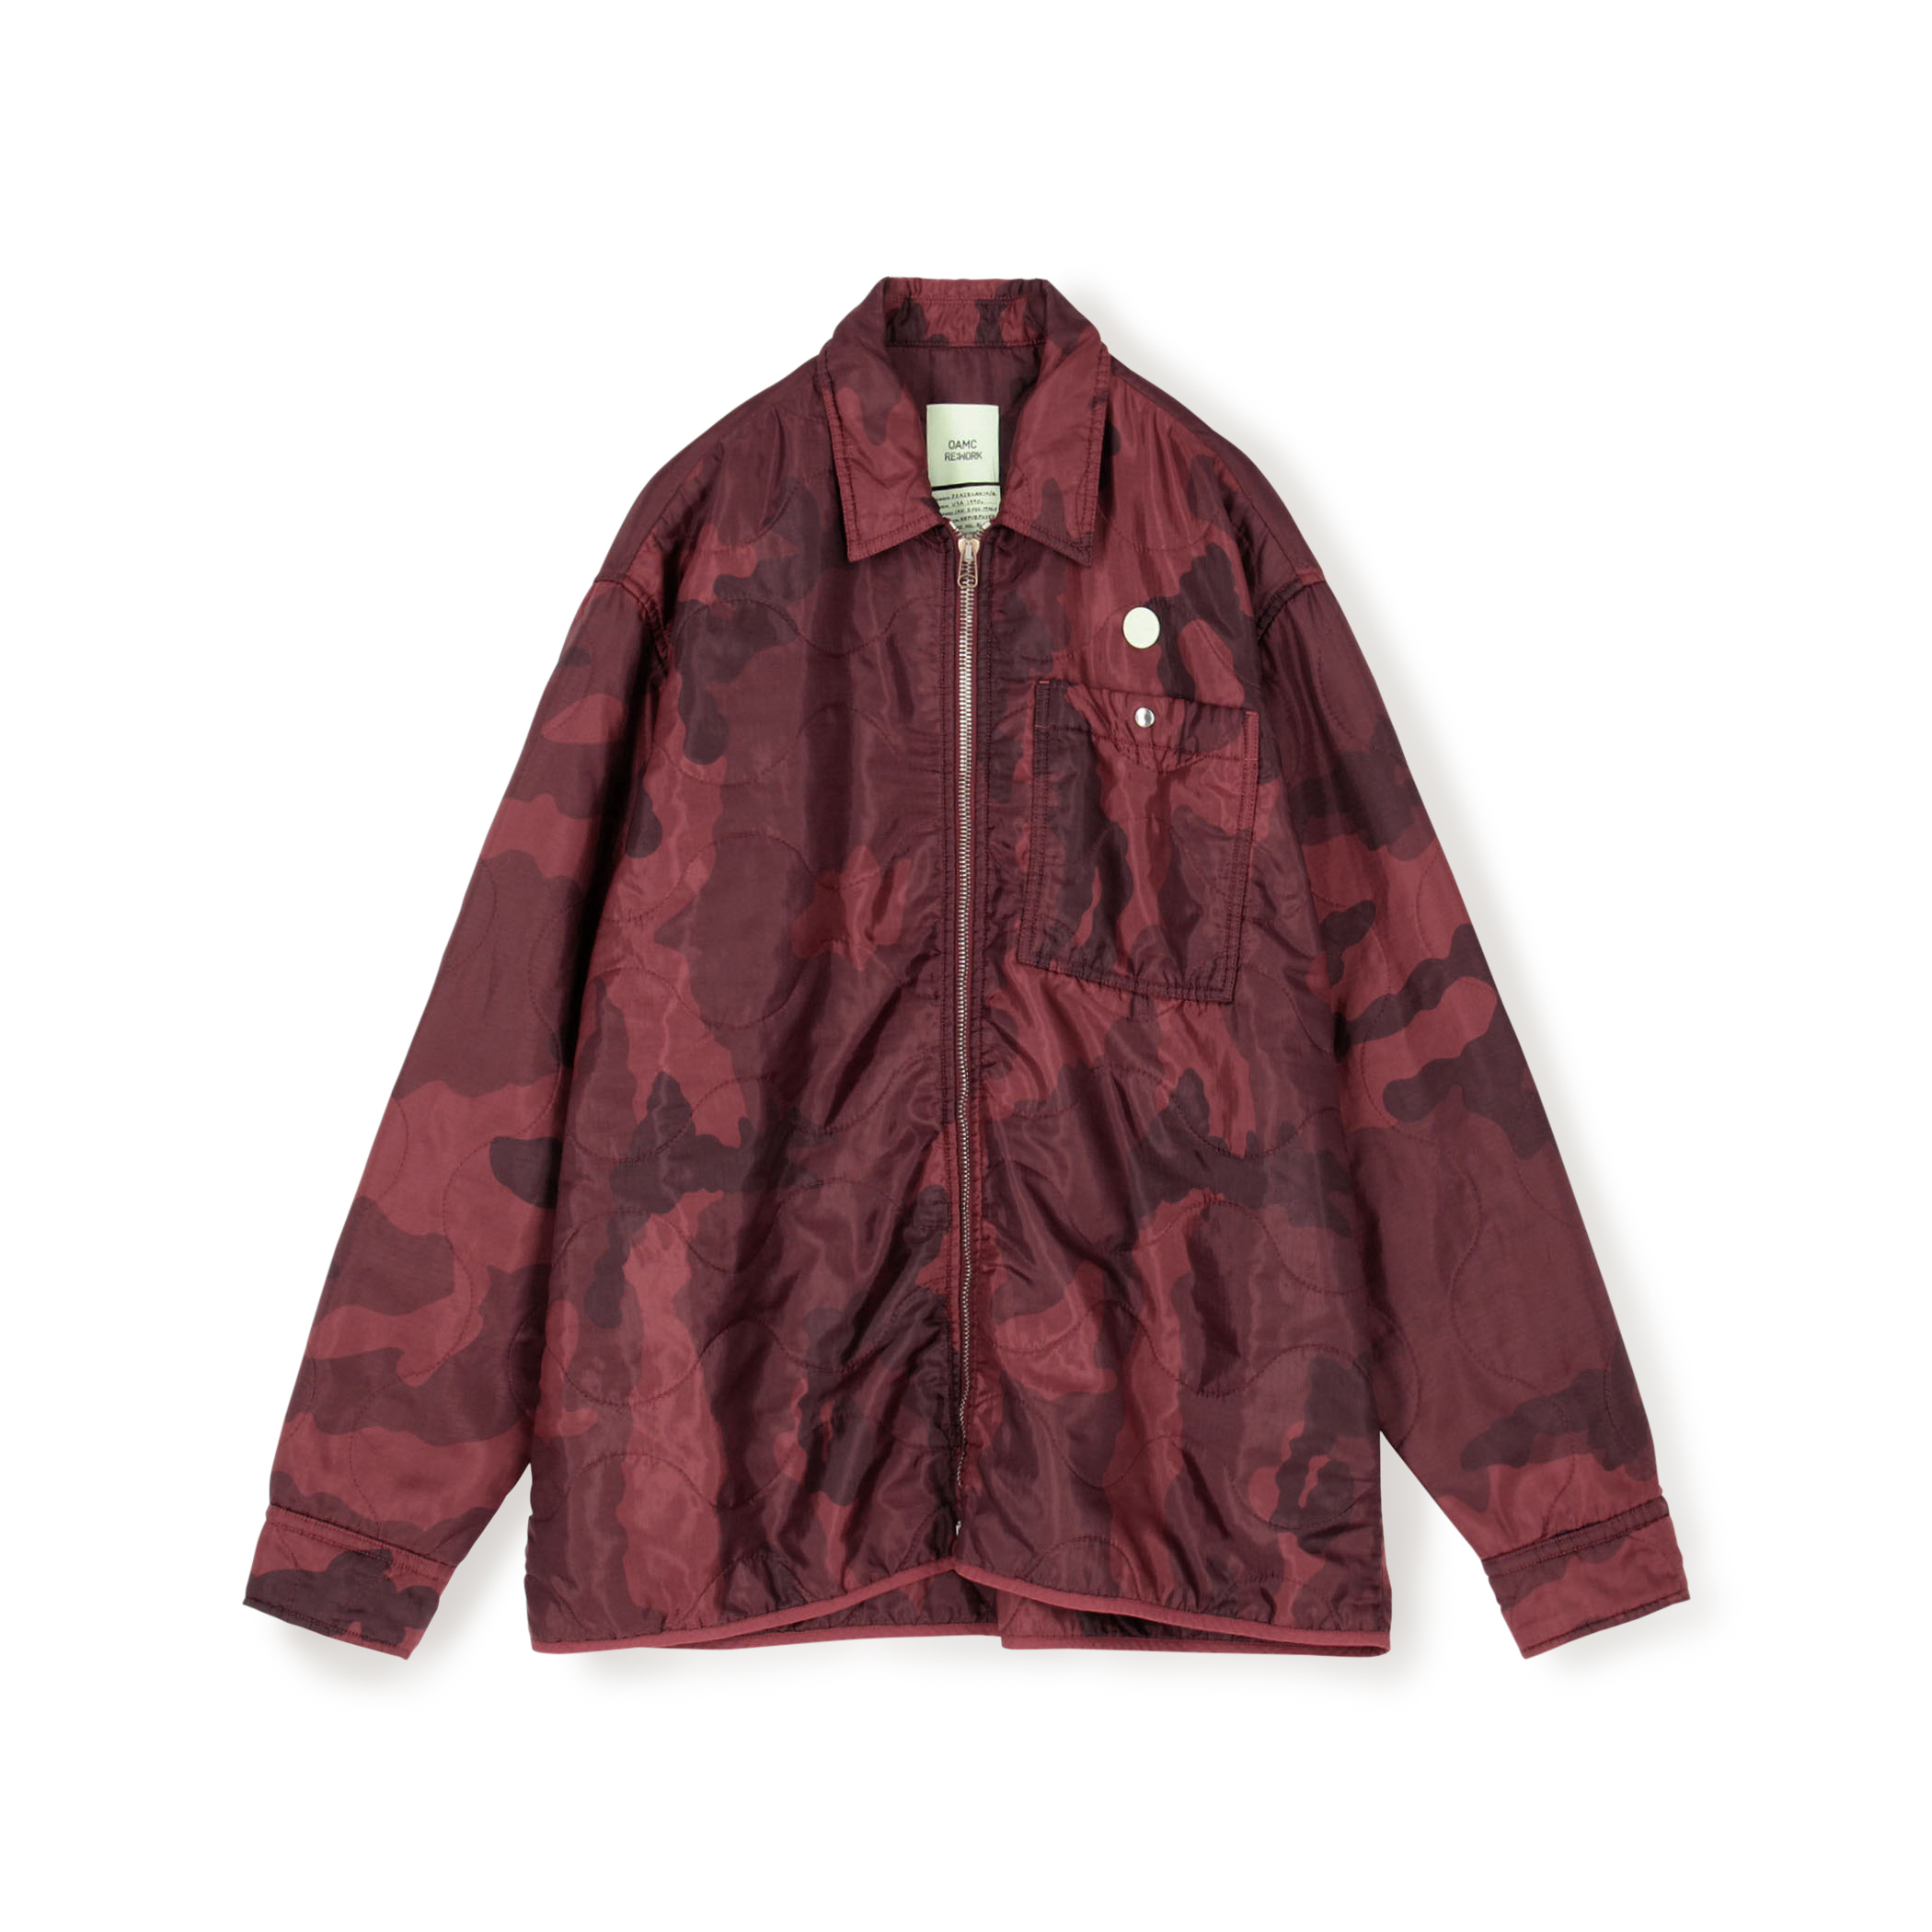 OAMC RE:WORK QUILTED SHIRT